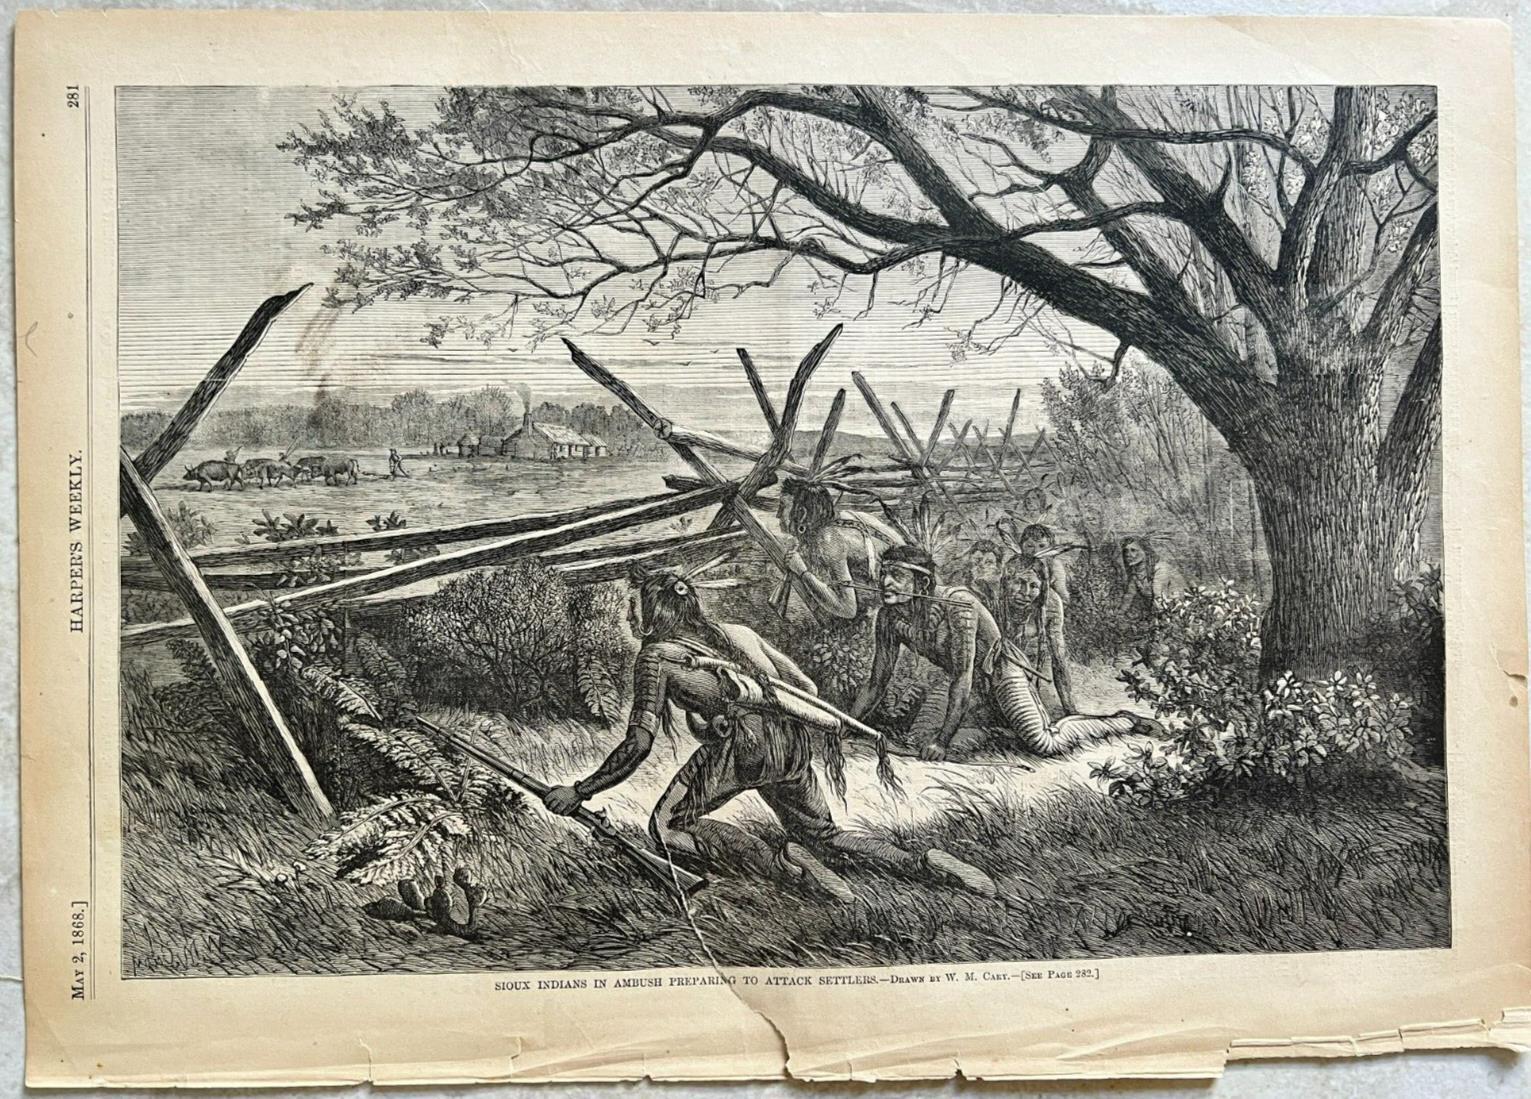 Harper's Weekly 1868  Sioux Indians In Ambush By W. M. Cary Print